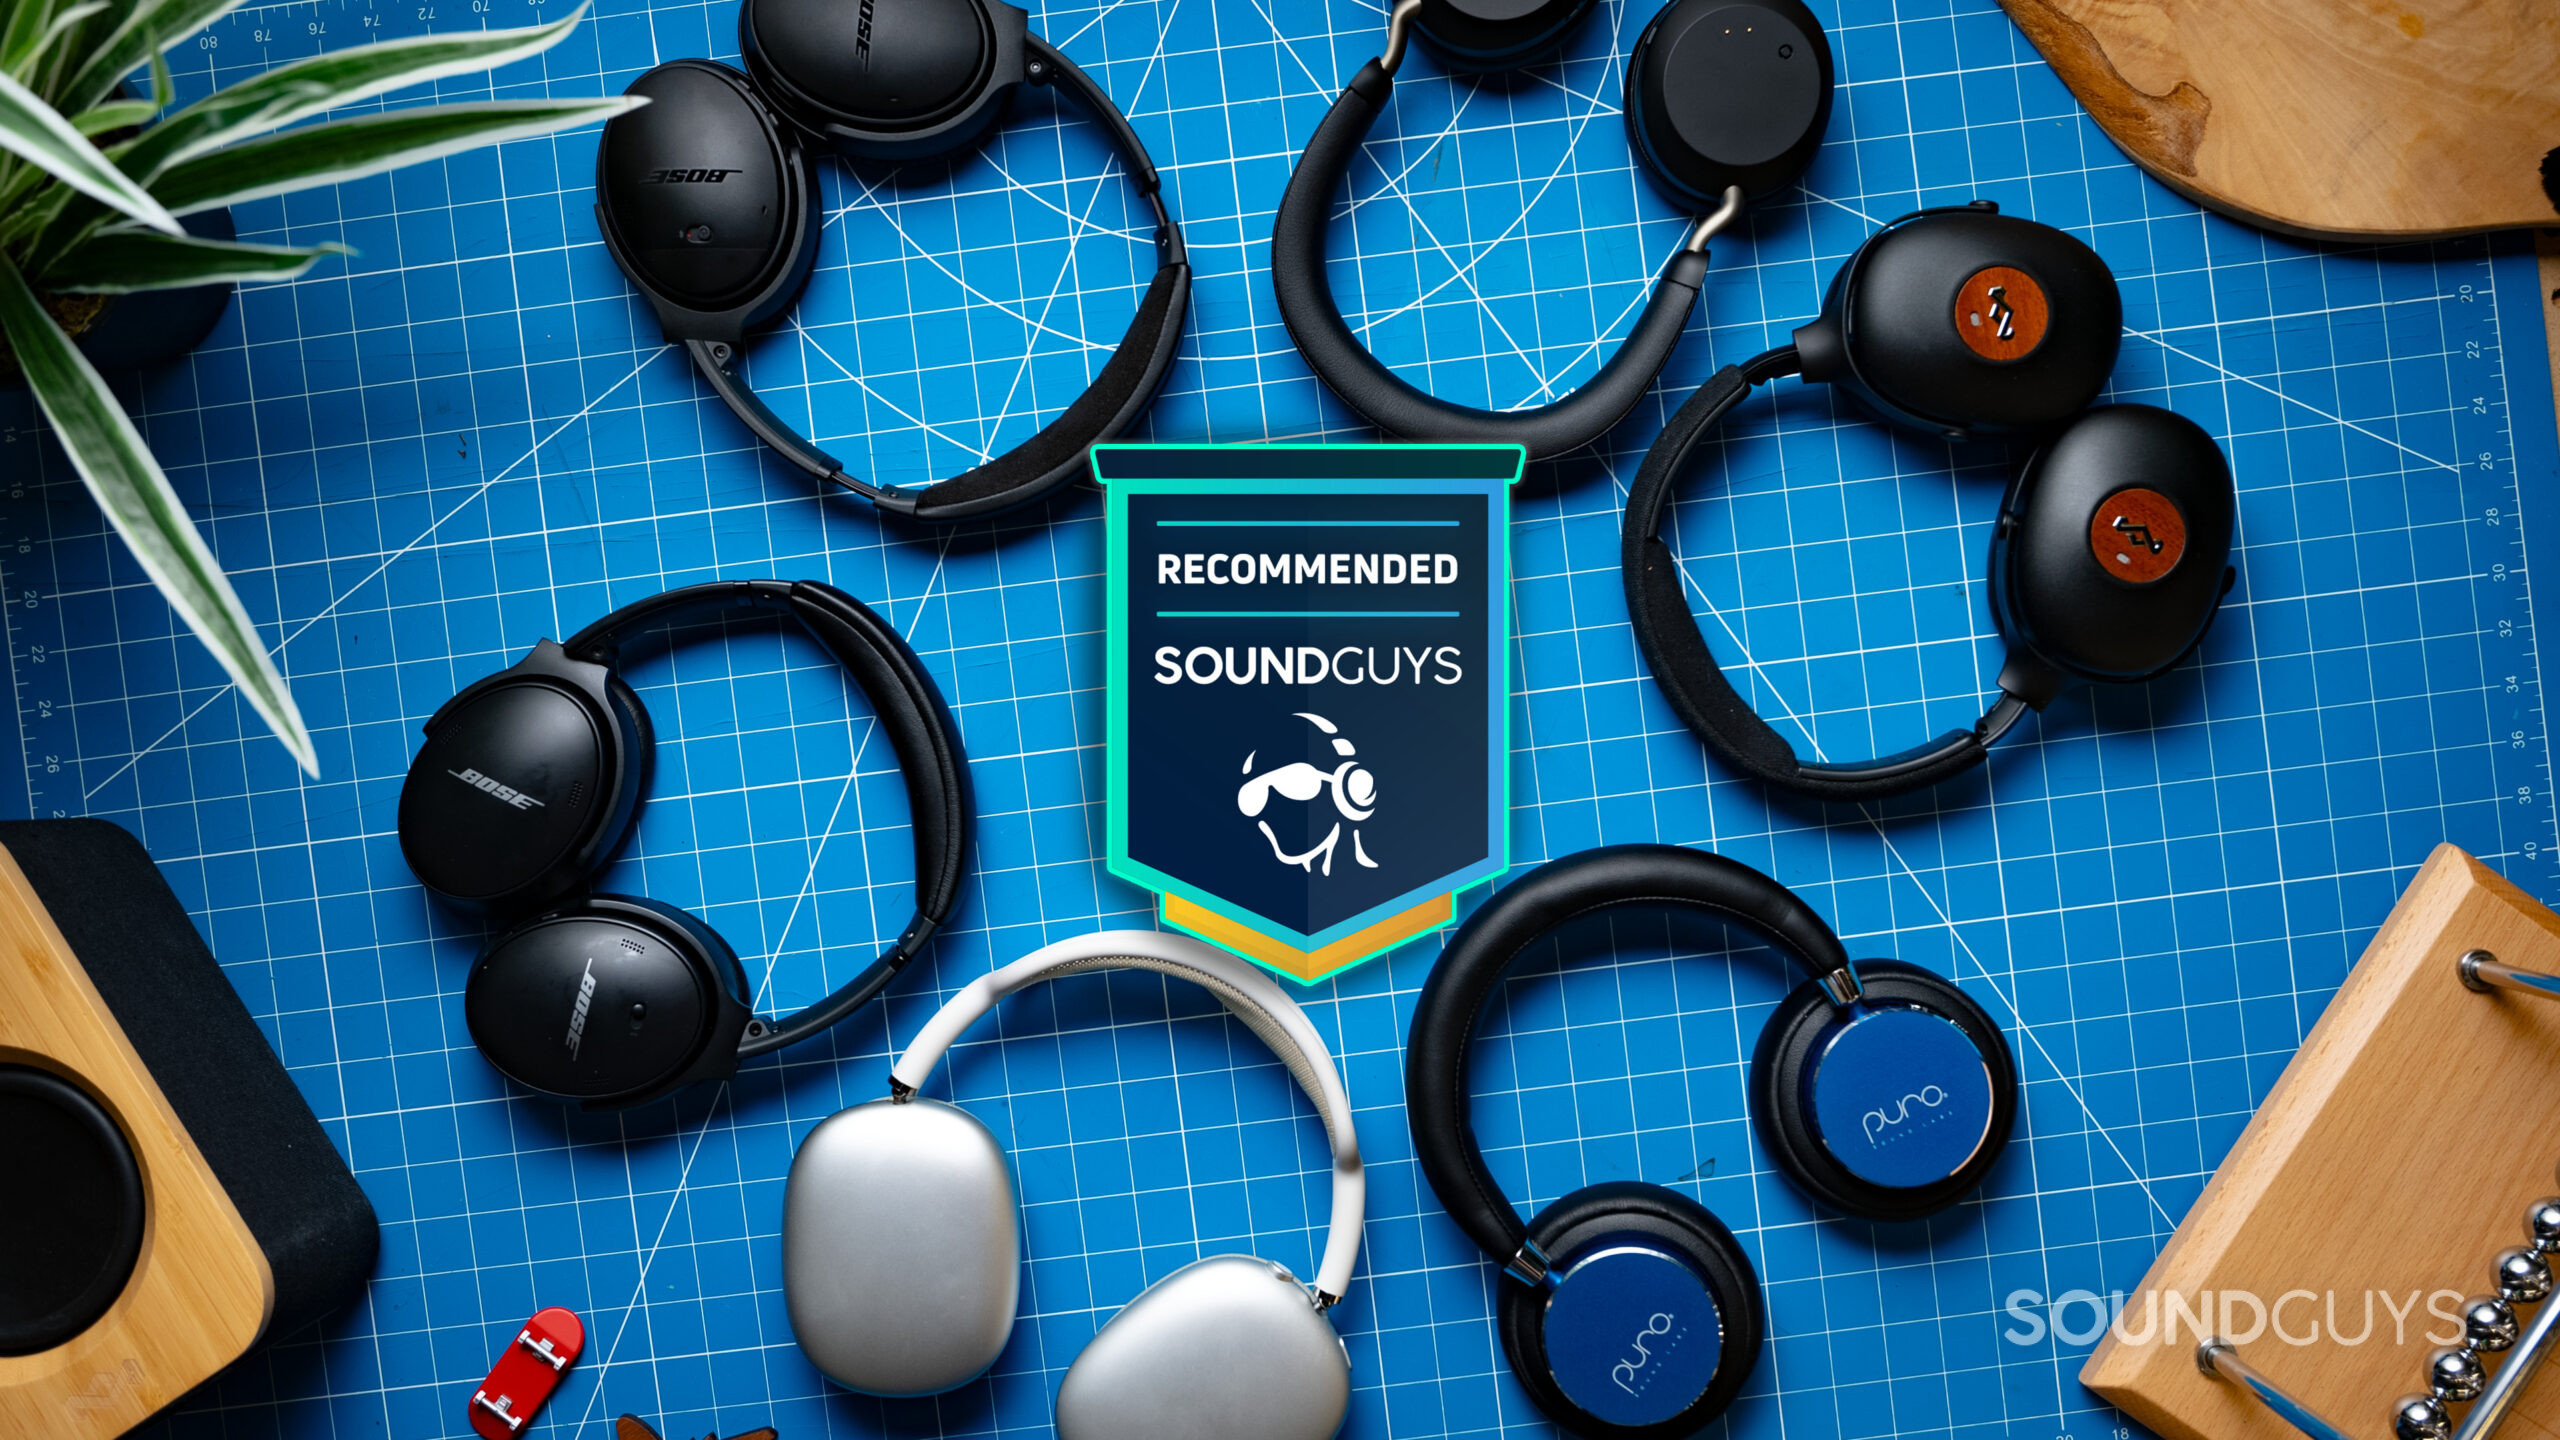 Best Headphones Reviews – All You Need to Know About the Best Headphones